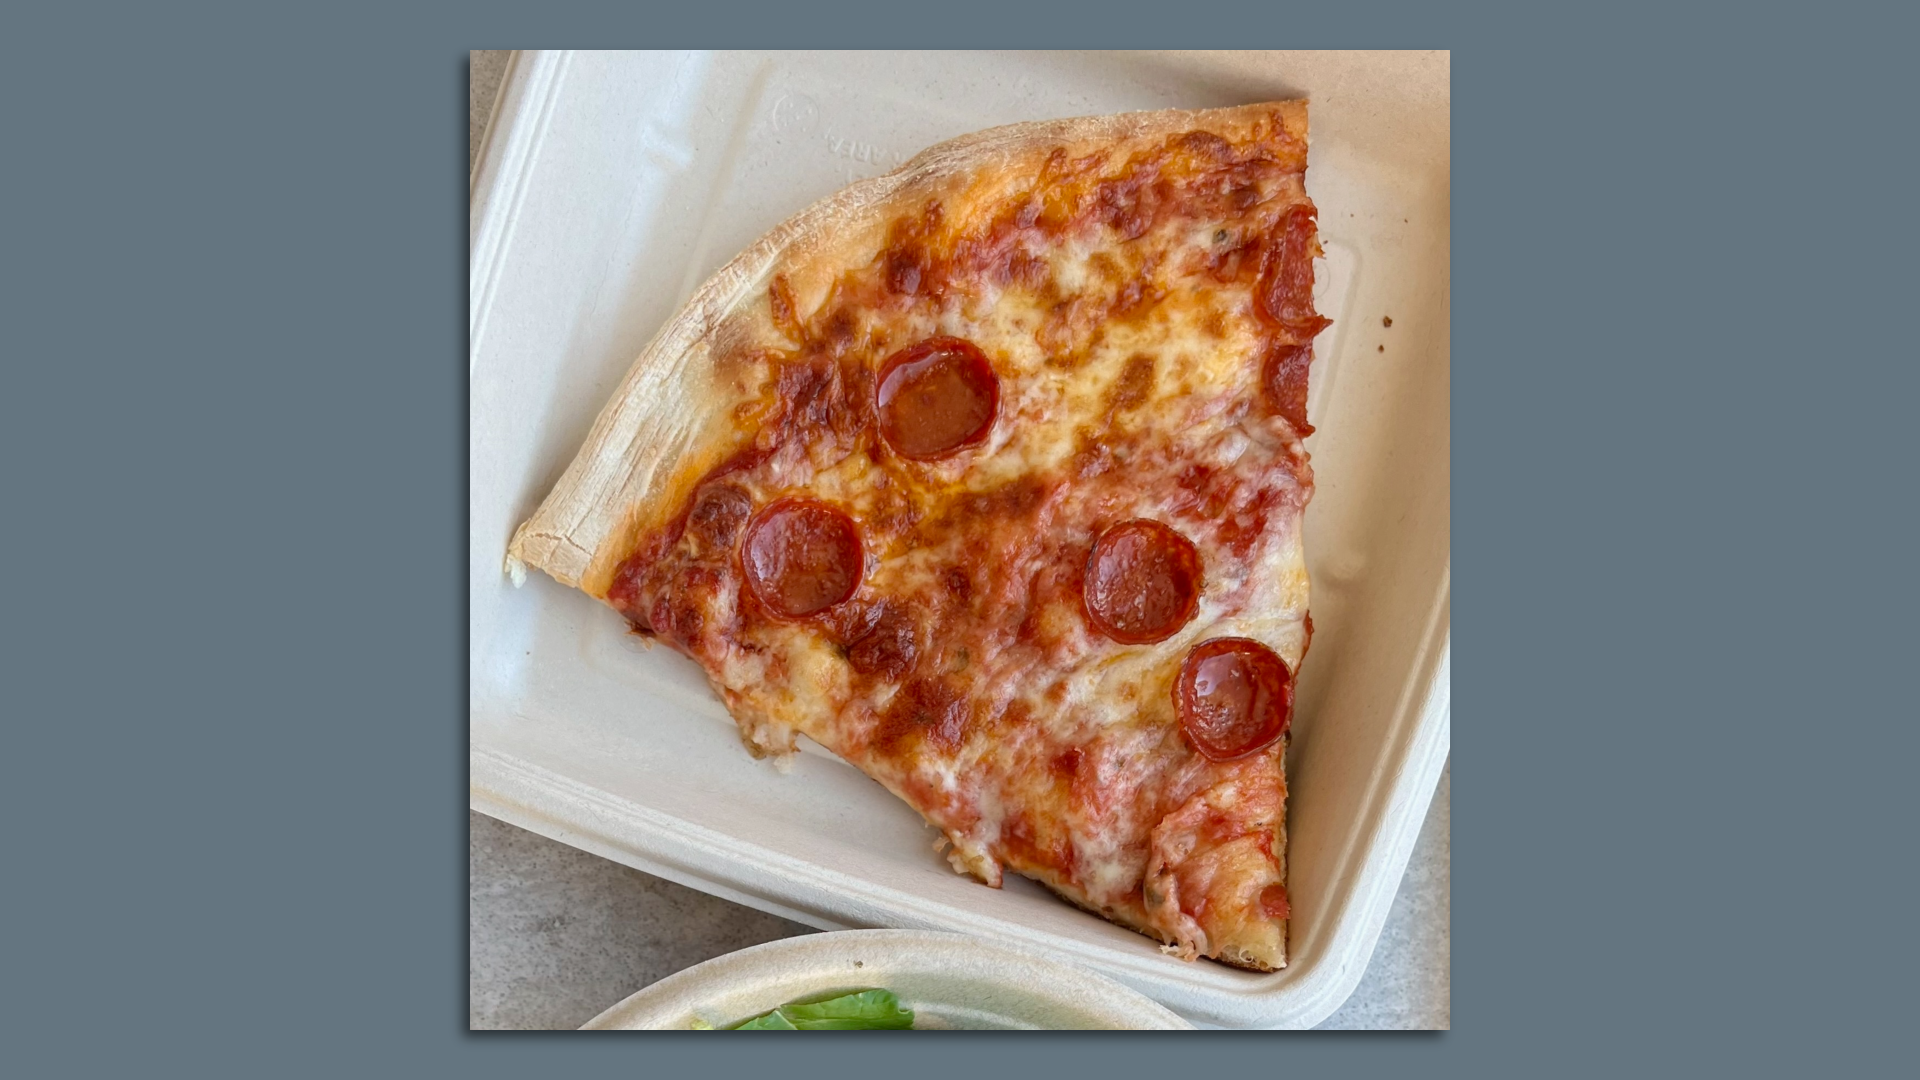 Review: A Slice of New York (Pizza)